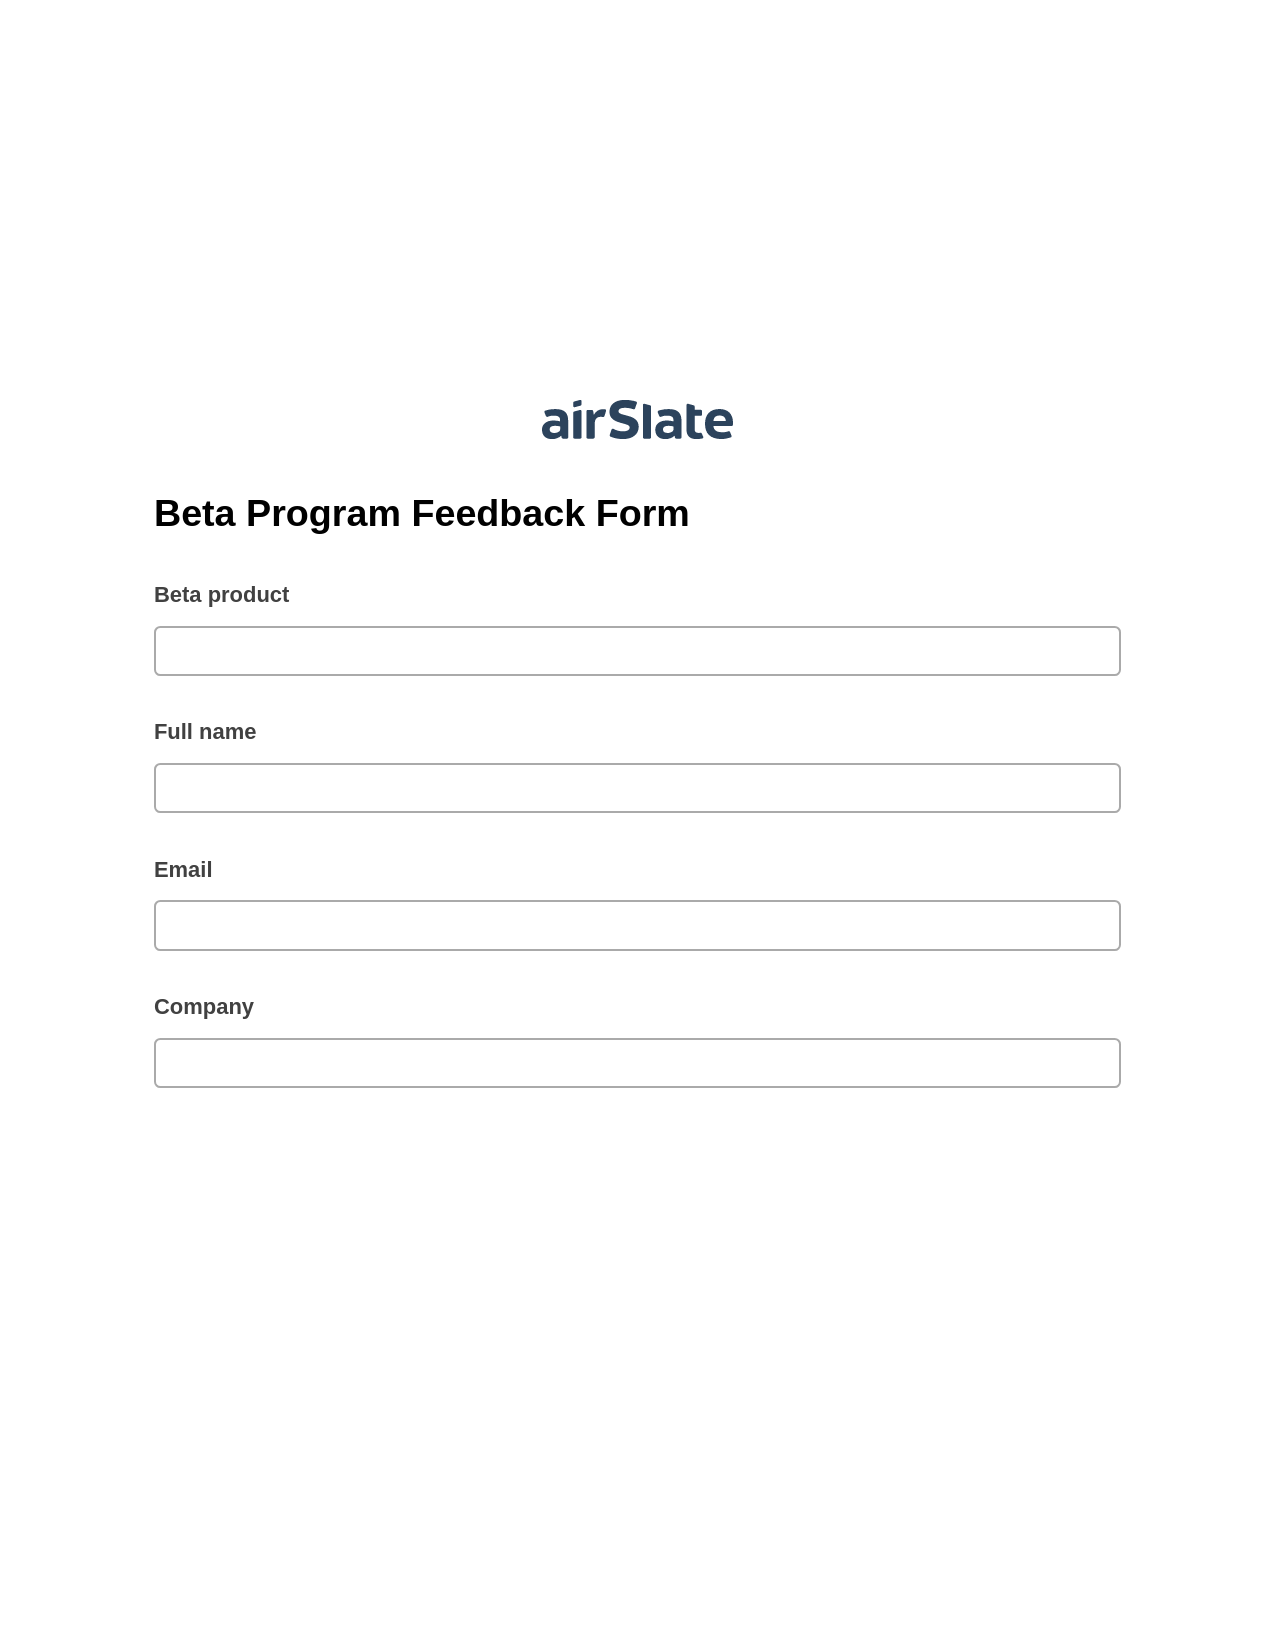 Multirole Beta Program Feedback Form Pre-fill Dropdown from Airtable, Assign Roles to Recipients Bot, Export to Smartsheet